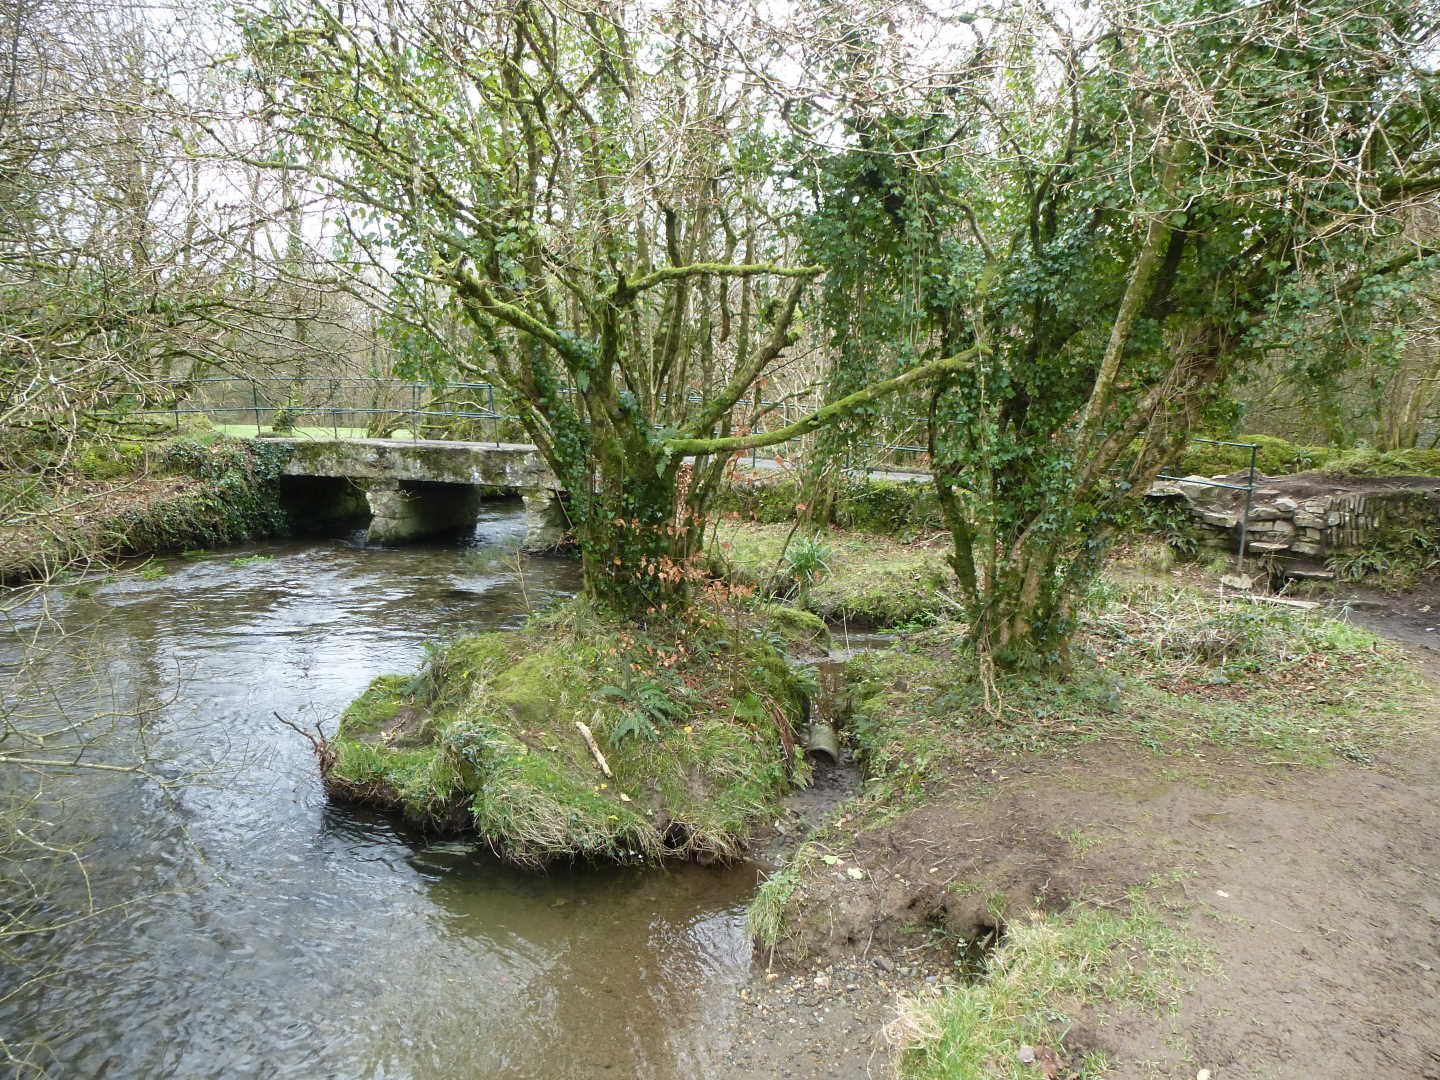 Trees in front of a small concrete bridge covered in moss